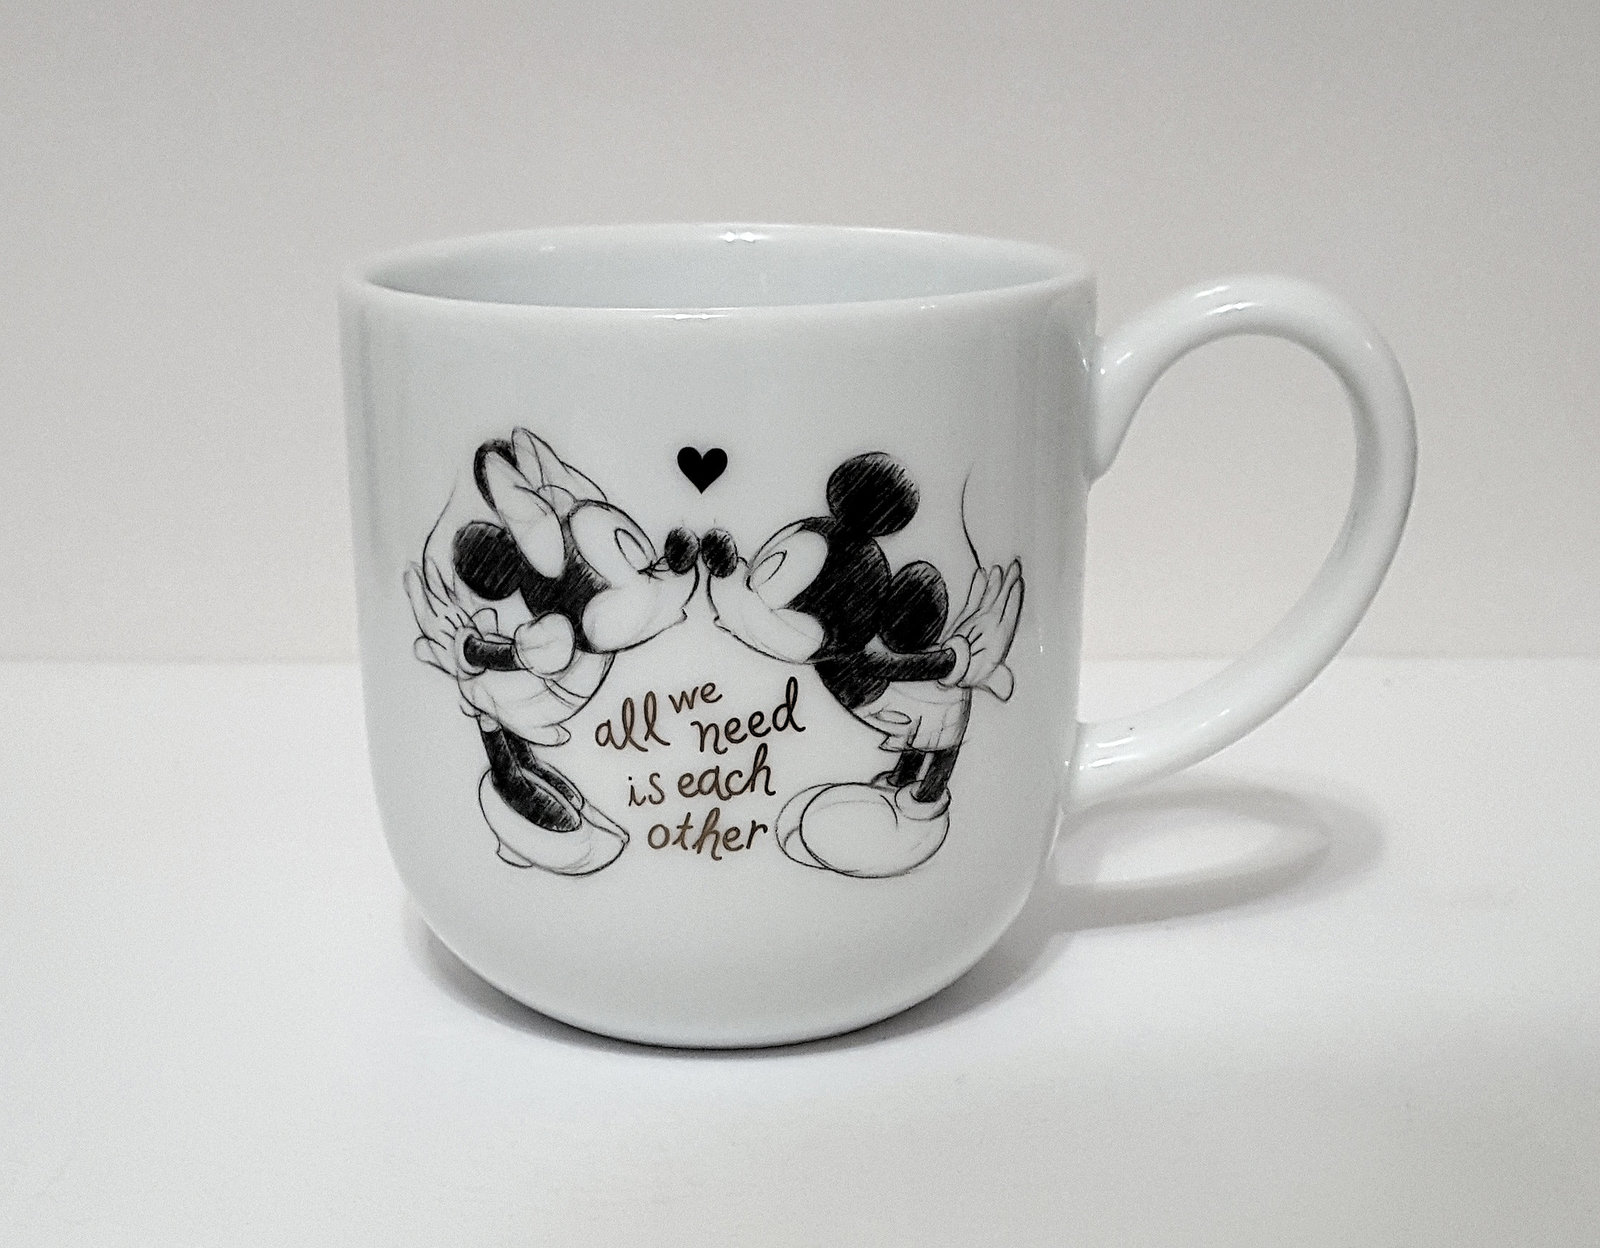 NEW RARE Williams Sonoma Mickey and Minnie Mouse "All we need is each other Mug" - $32.99